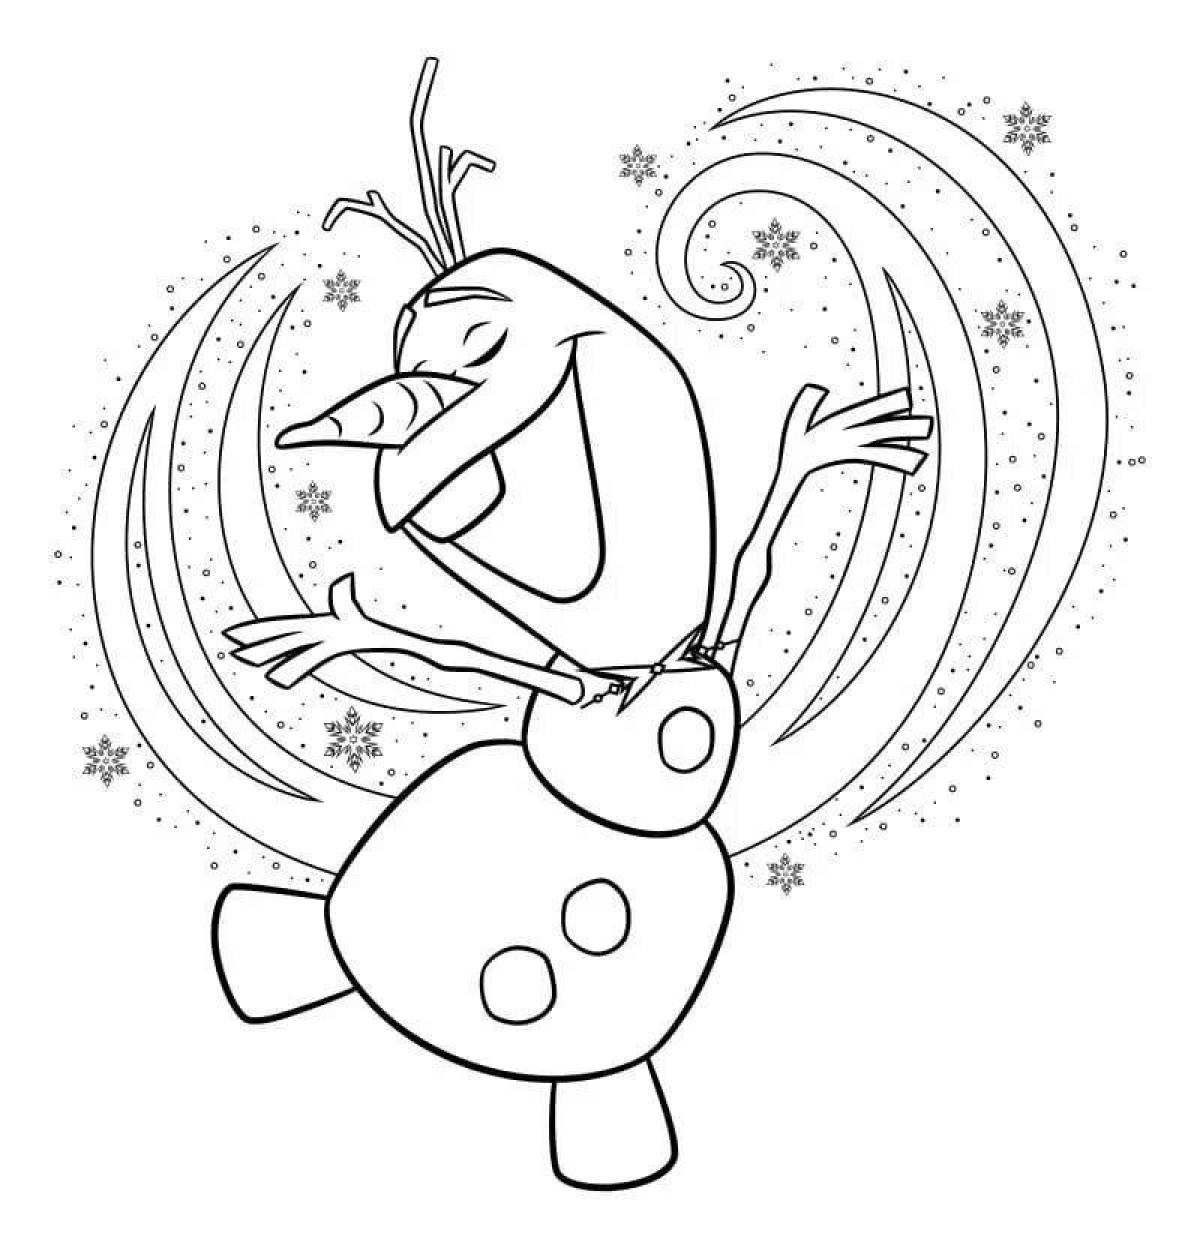 Olaf the charming snowman coloring book